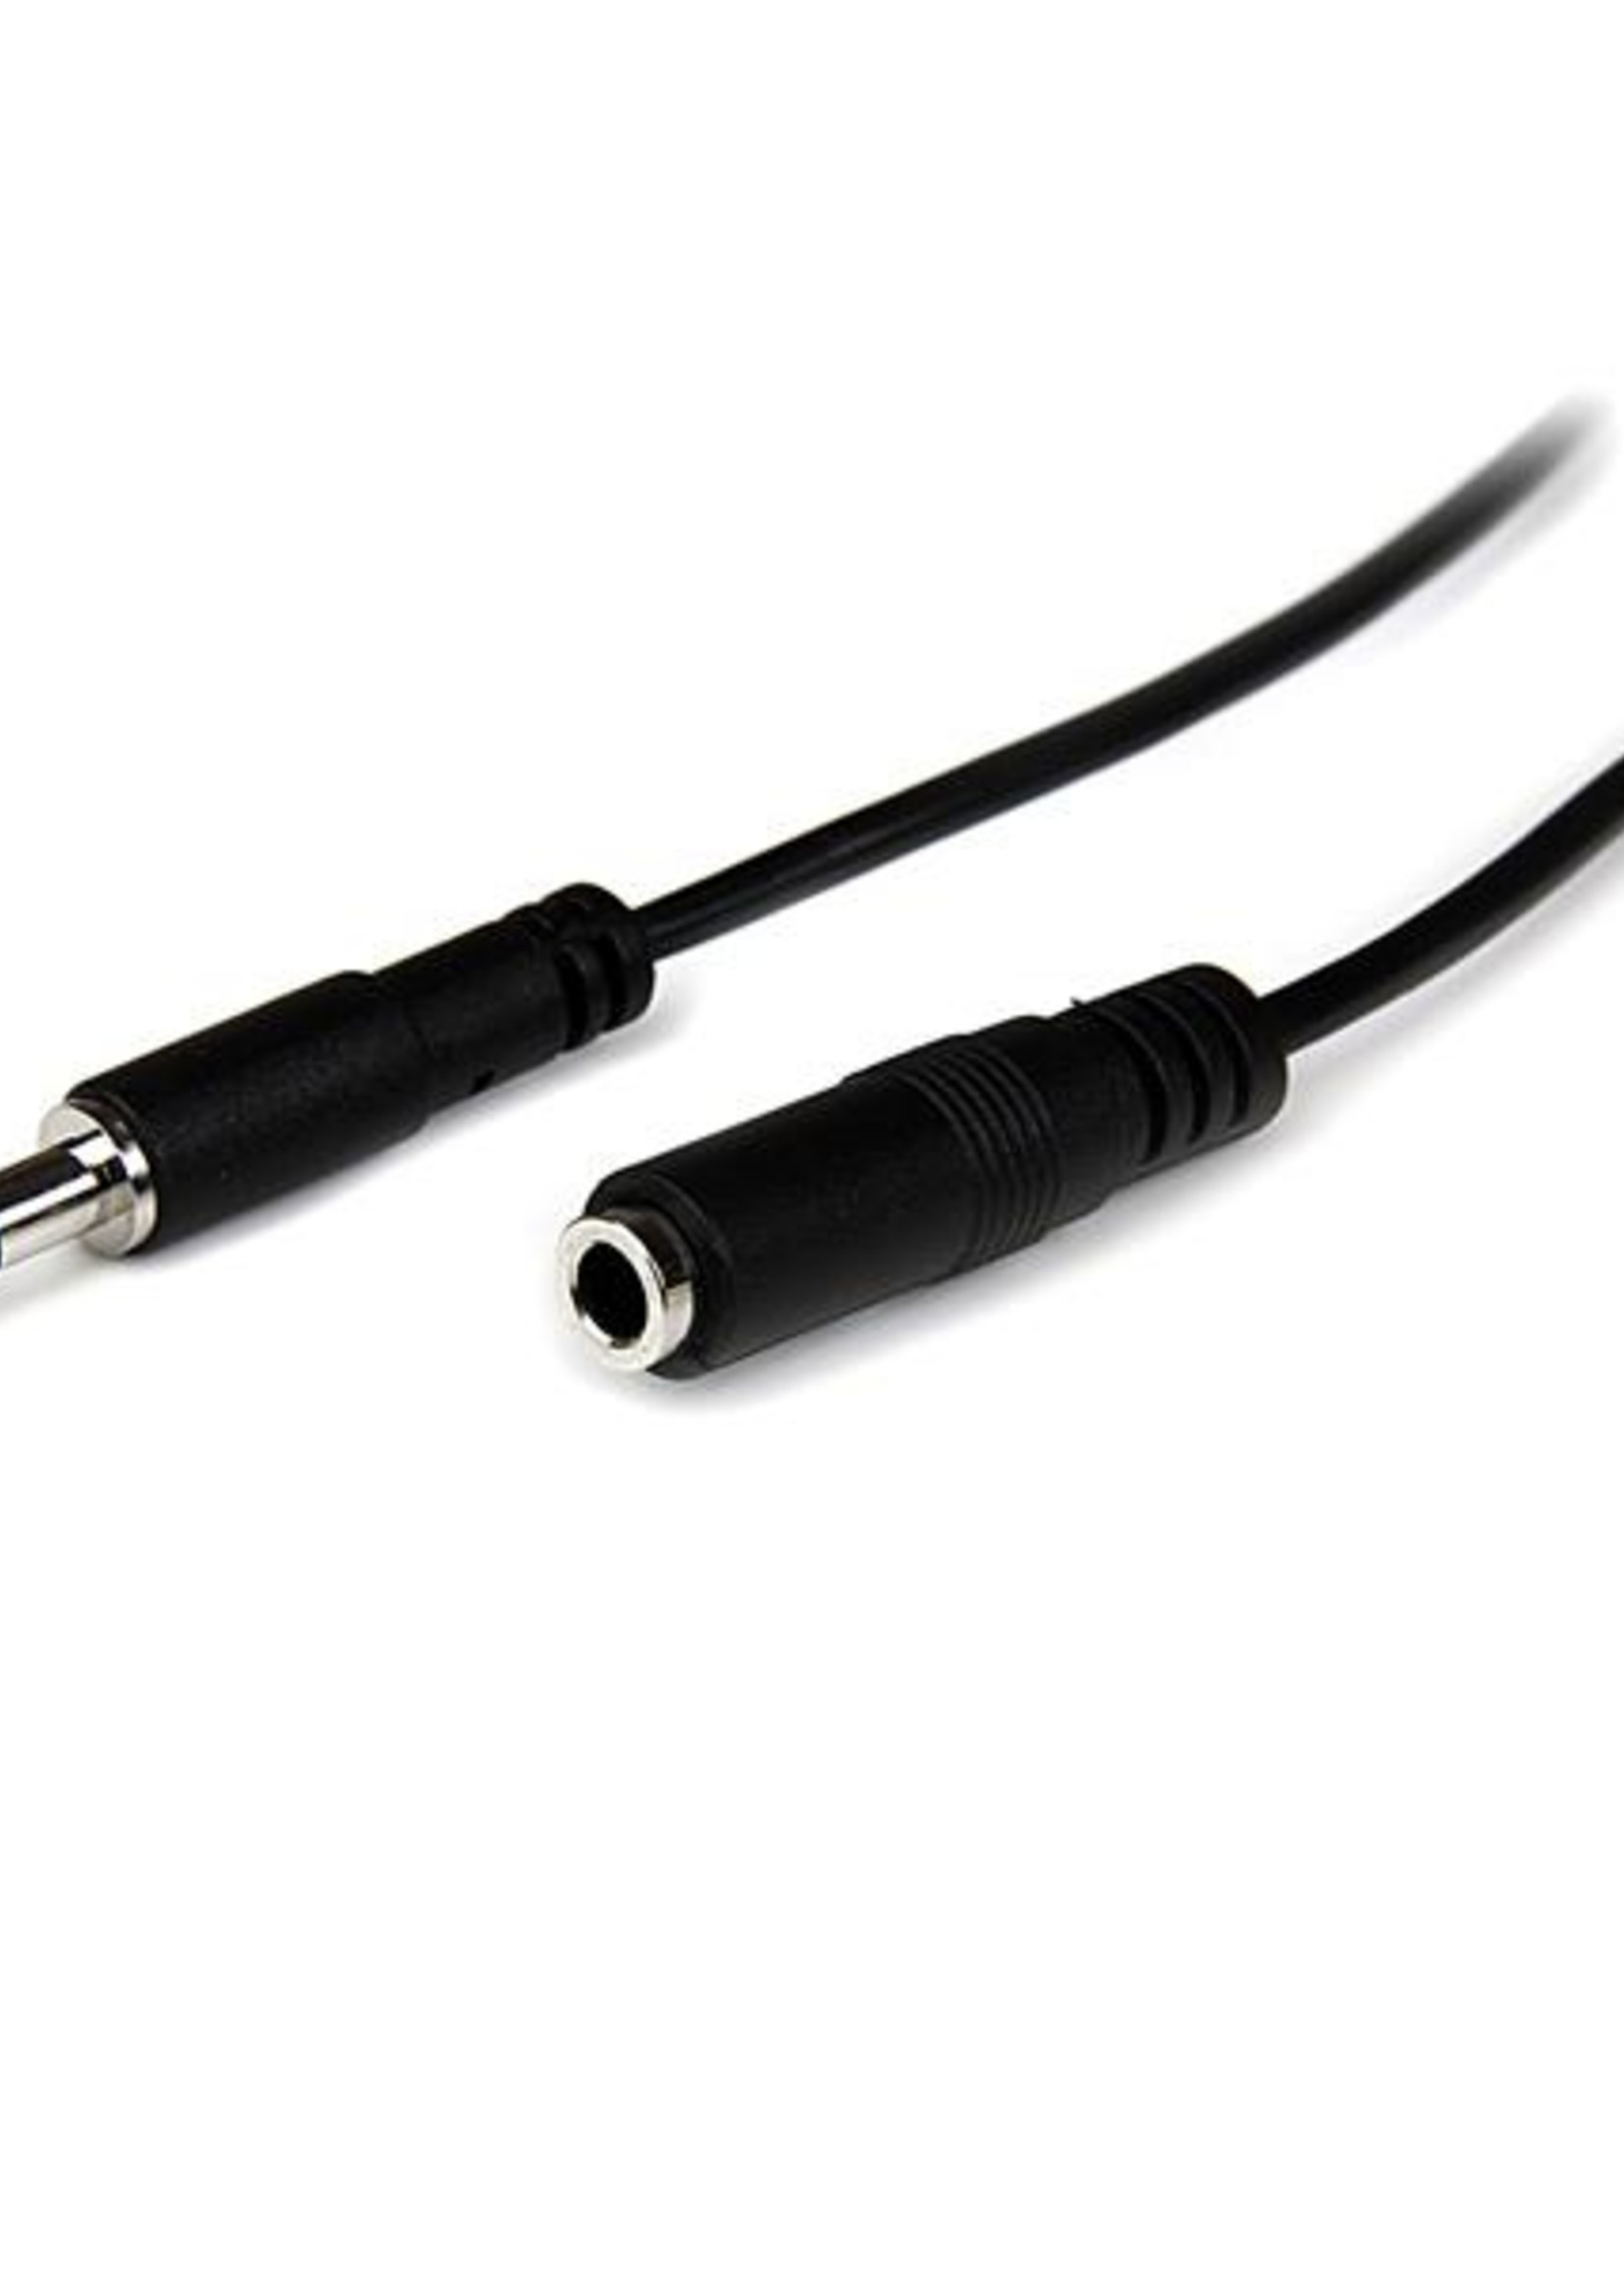 1m Slim 3.5mm Stereo Extension Cable M/F